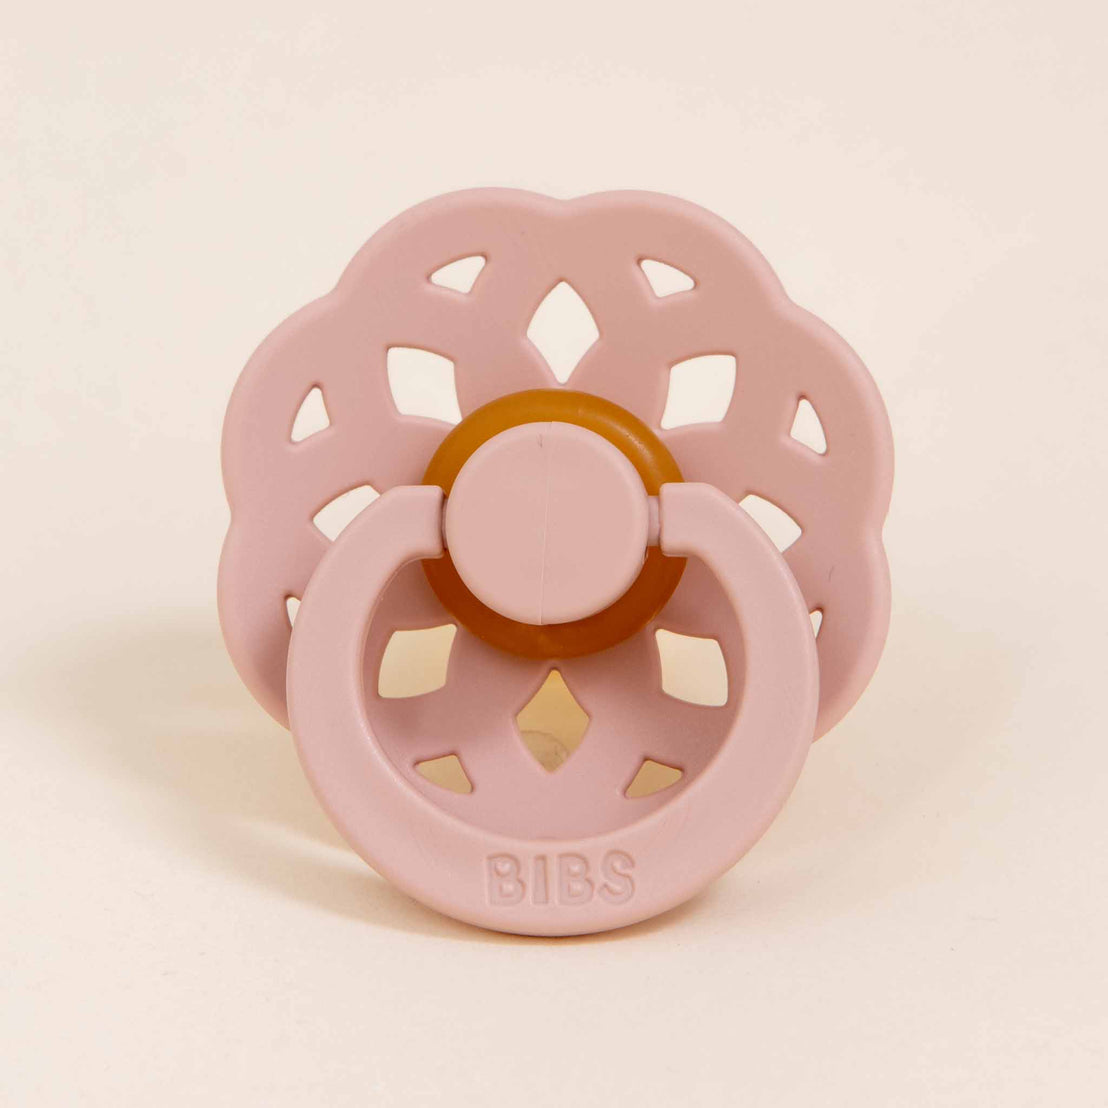 The Ava pacifier in blush with a flower-shaped silicone pacifier and button center labeled "Bibs" on a beige background.